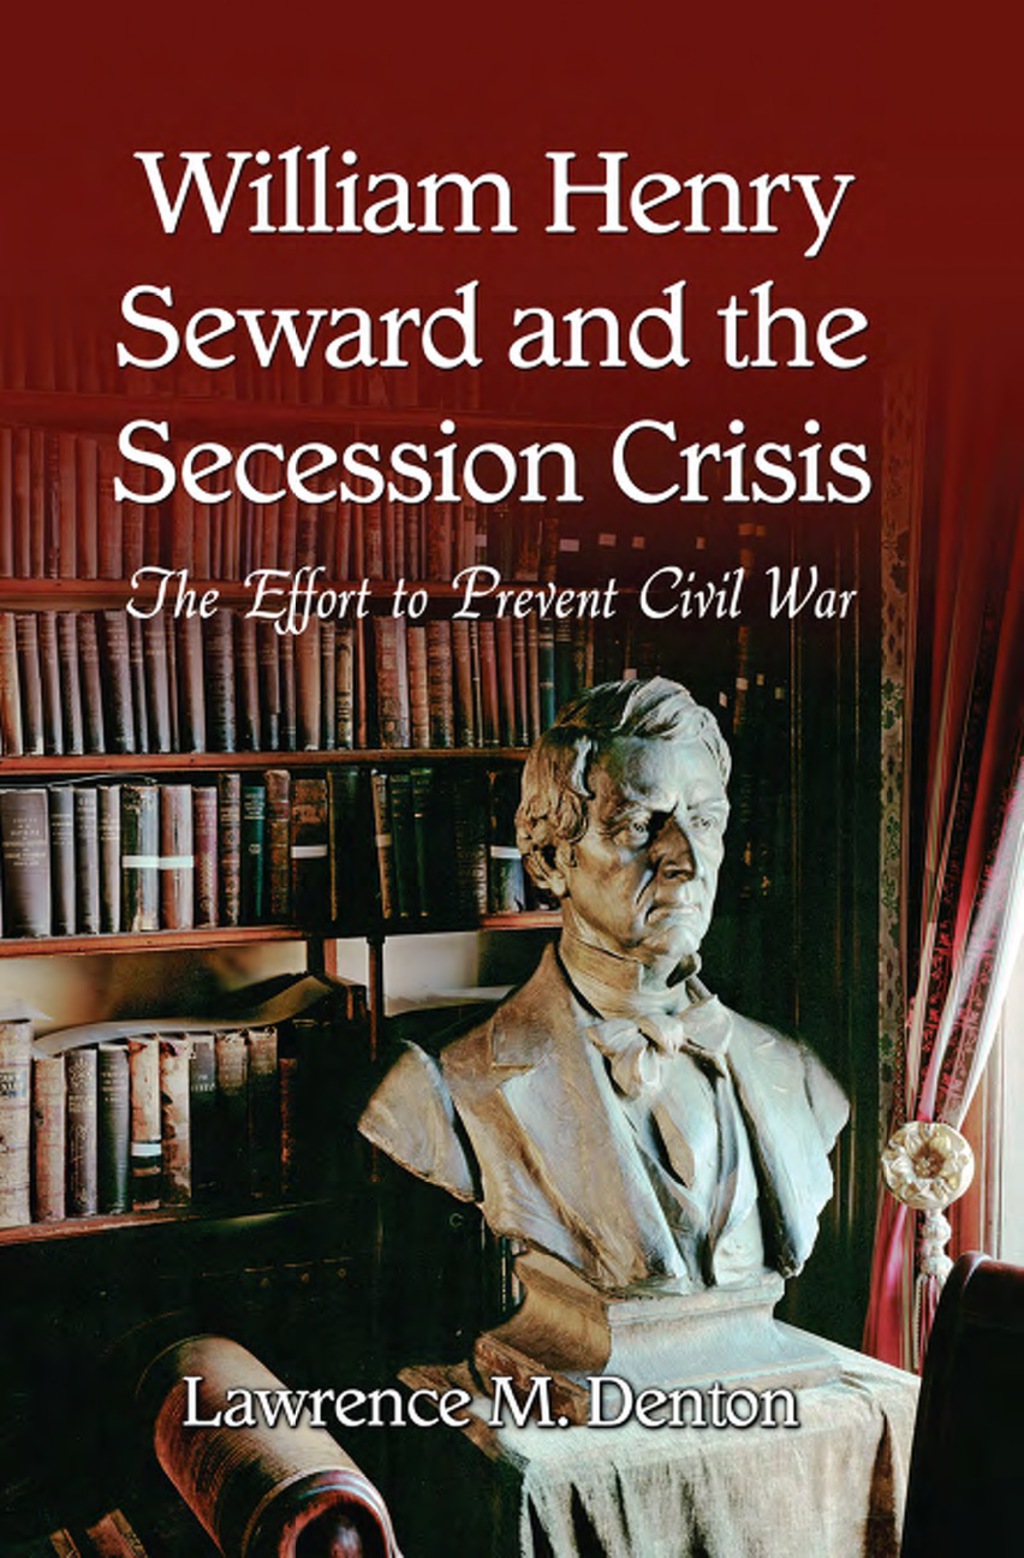 William Henry Seward and the Secession Crisis: The Effort to Prevent Civil War (eBook) - Lawrence M. Denton,